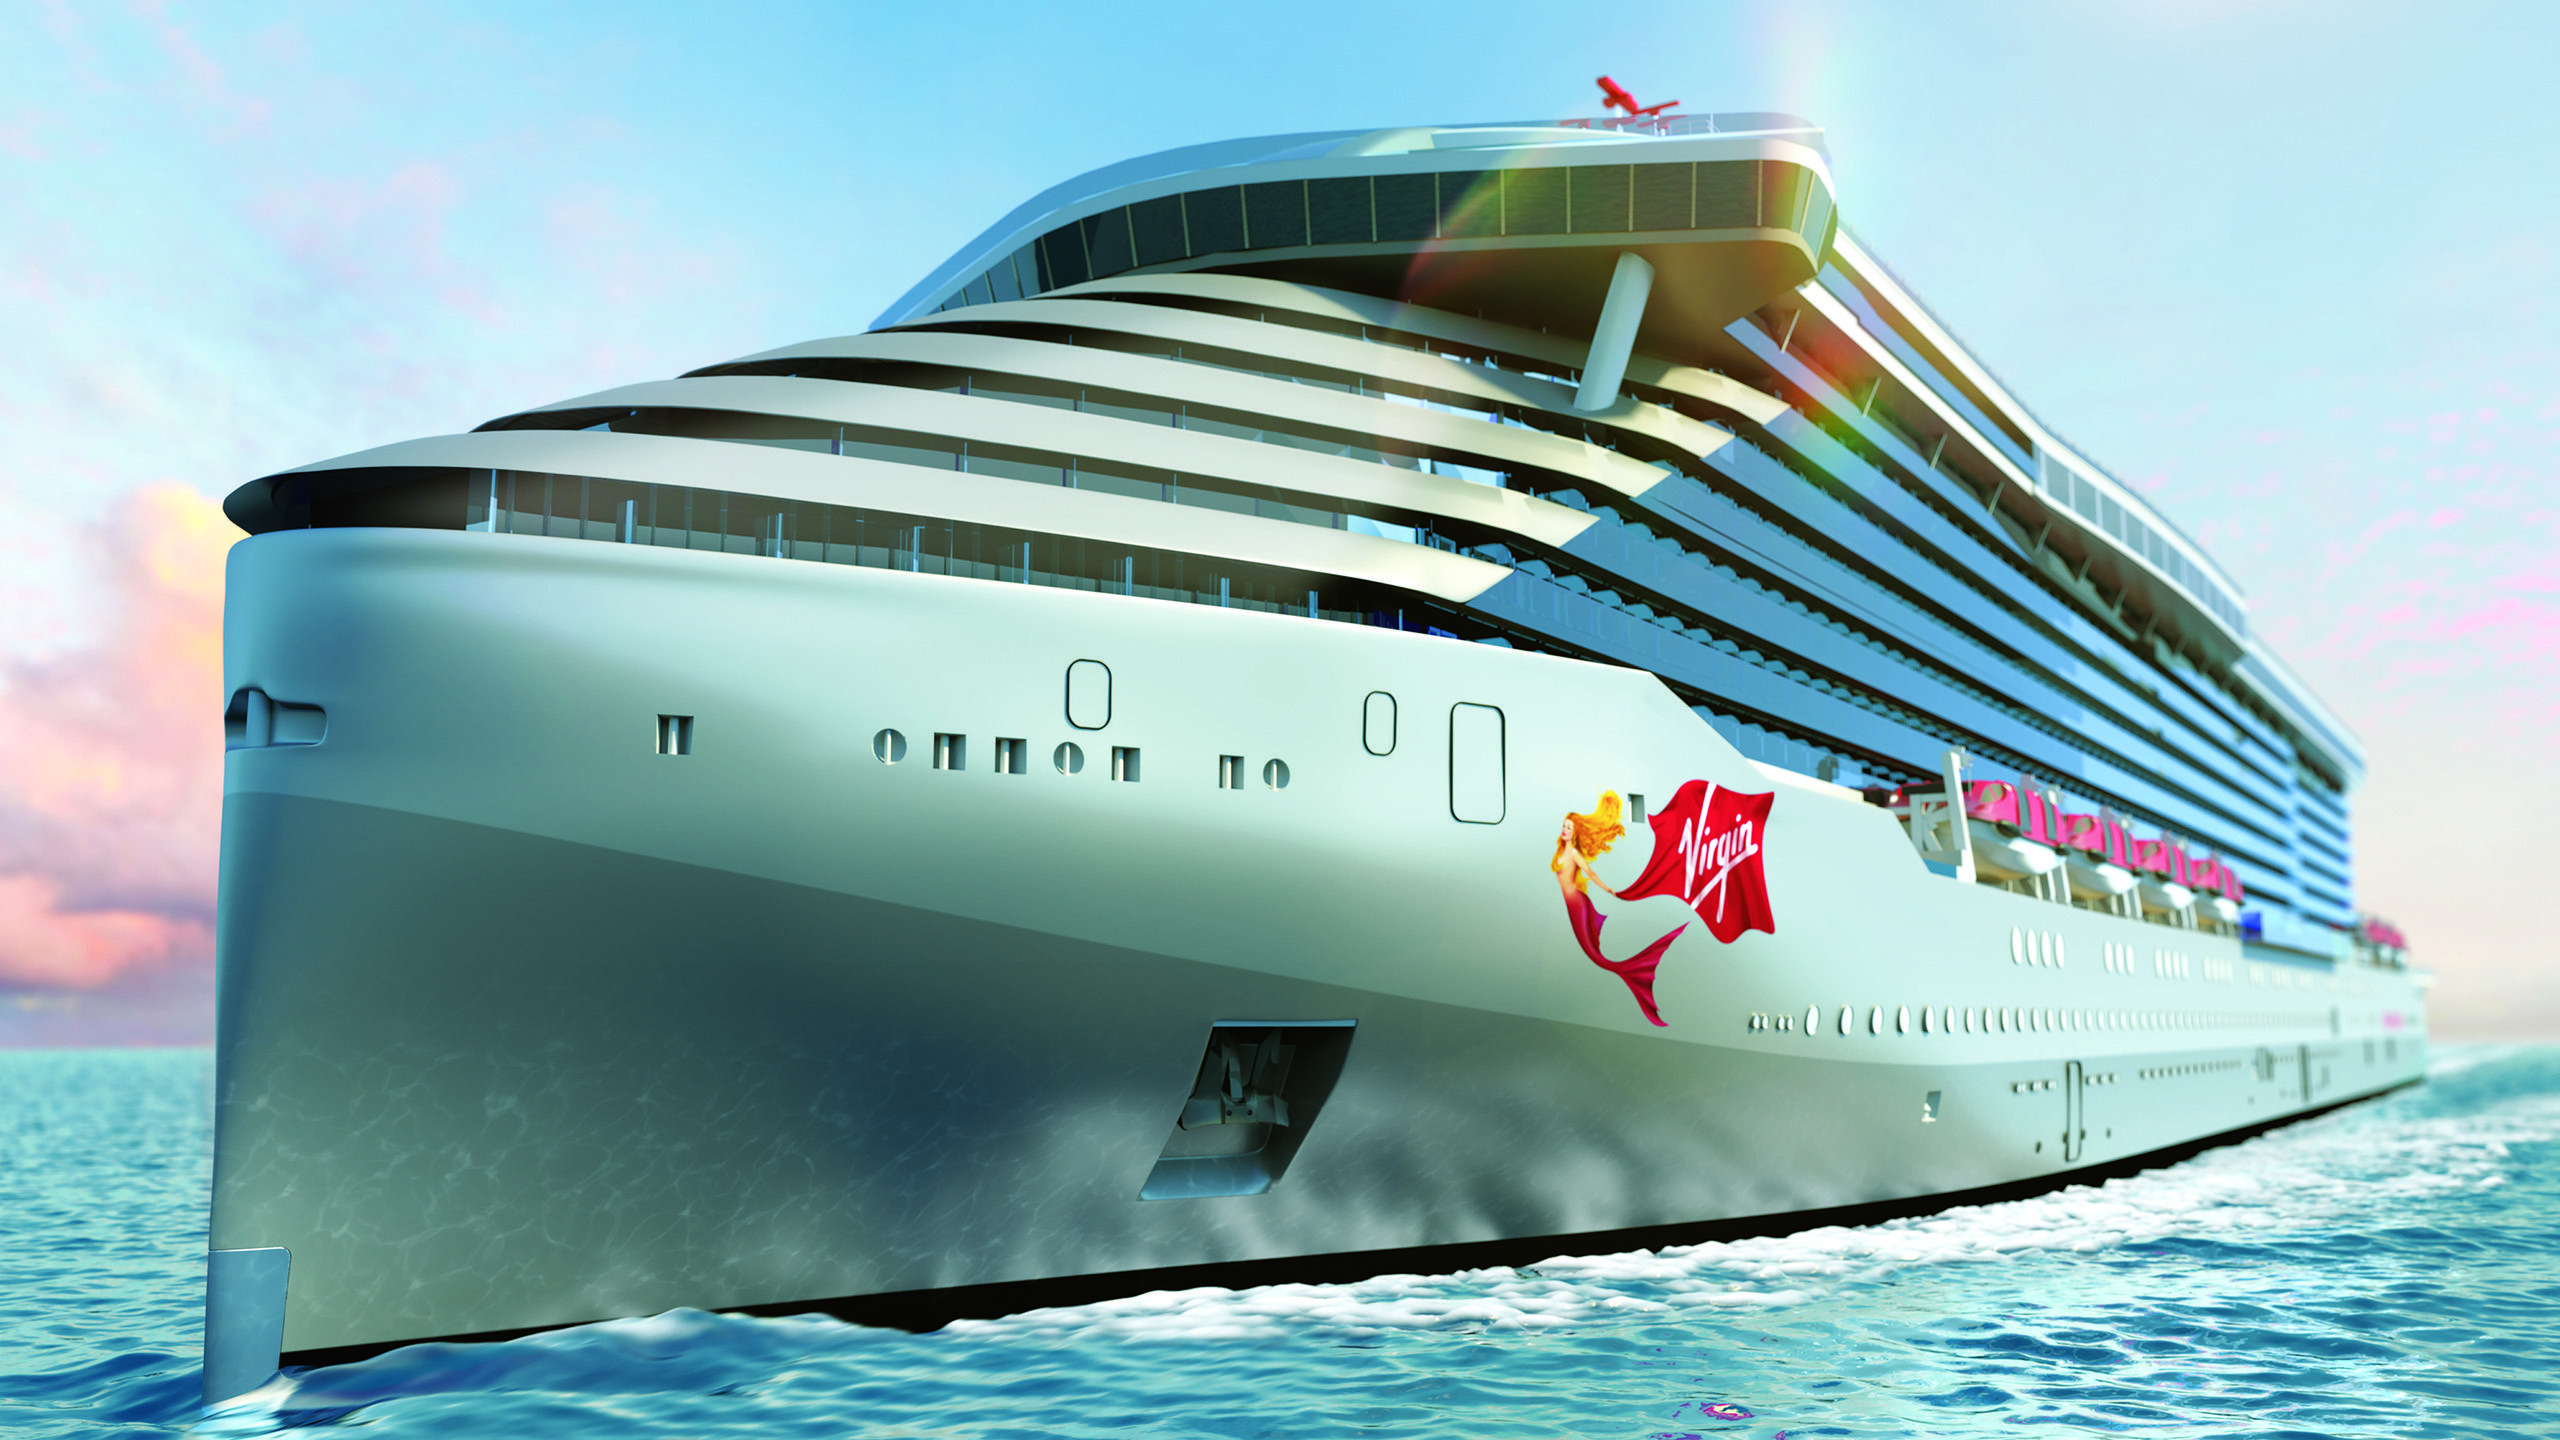 ABB to power new Virgin Voyages cruise ship fleet with highest energy efficiency